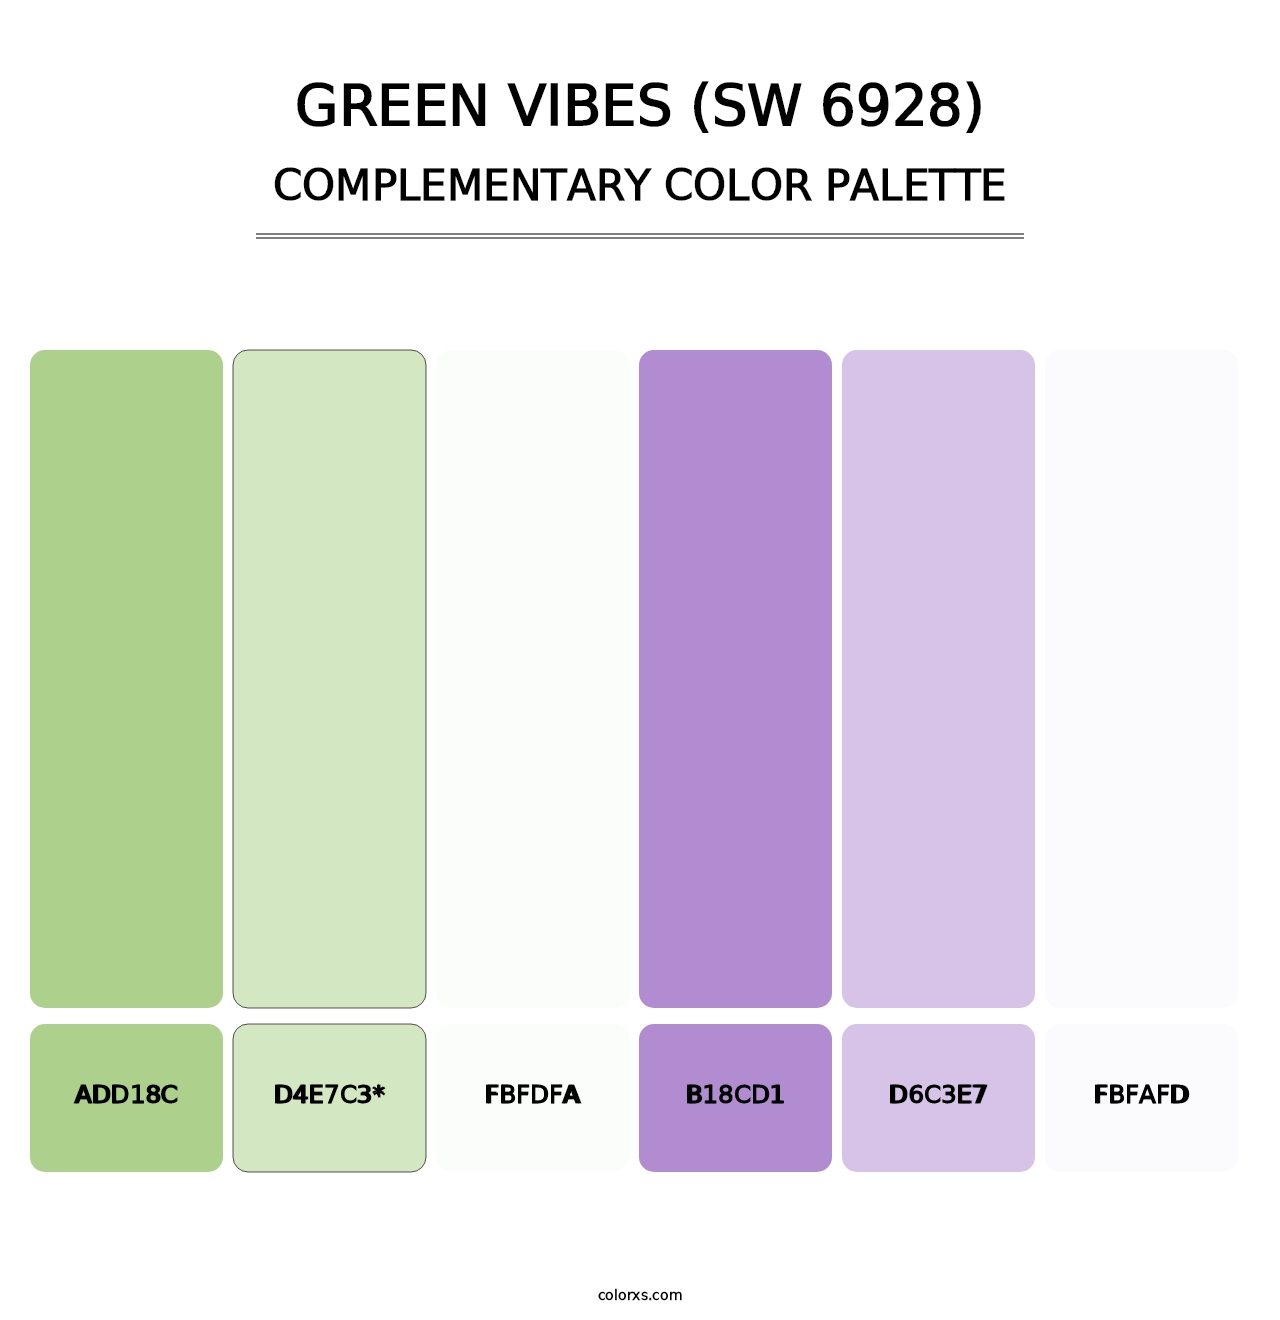 Green Vibes (SW 6928) - Complementary Color Palette